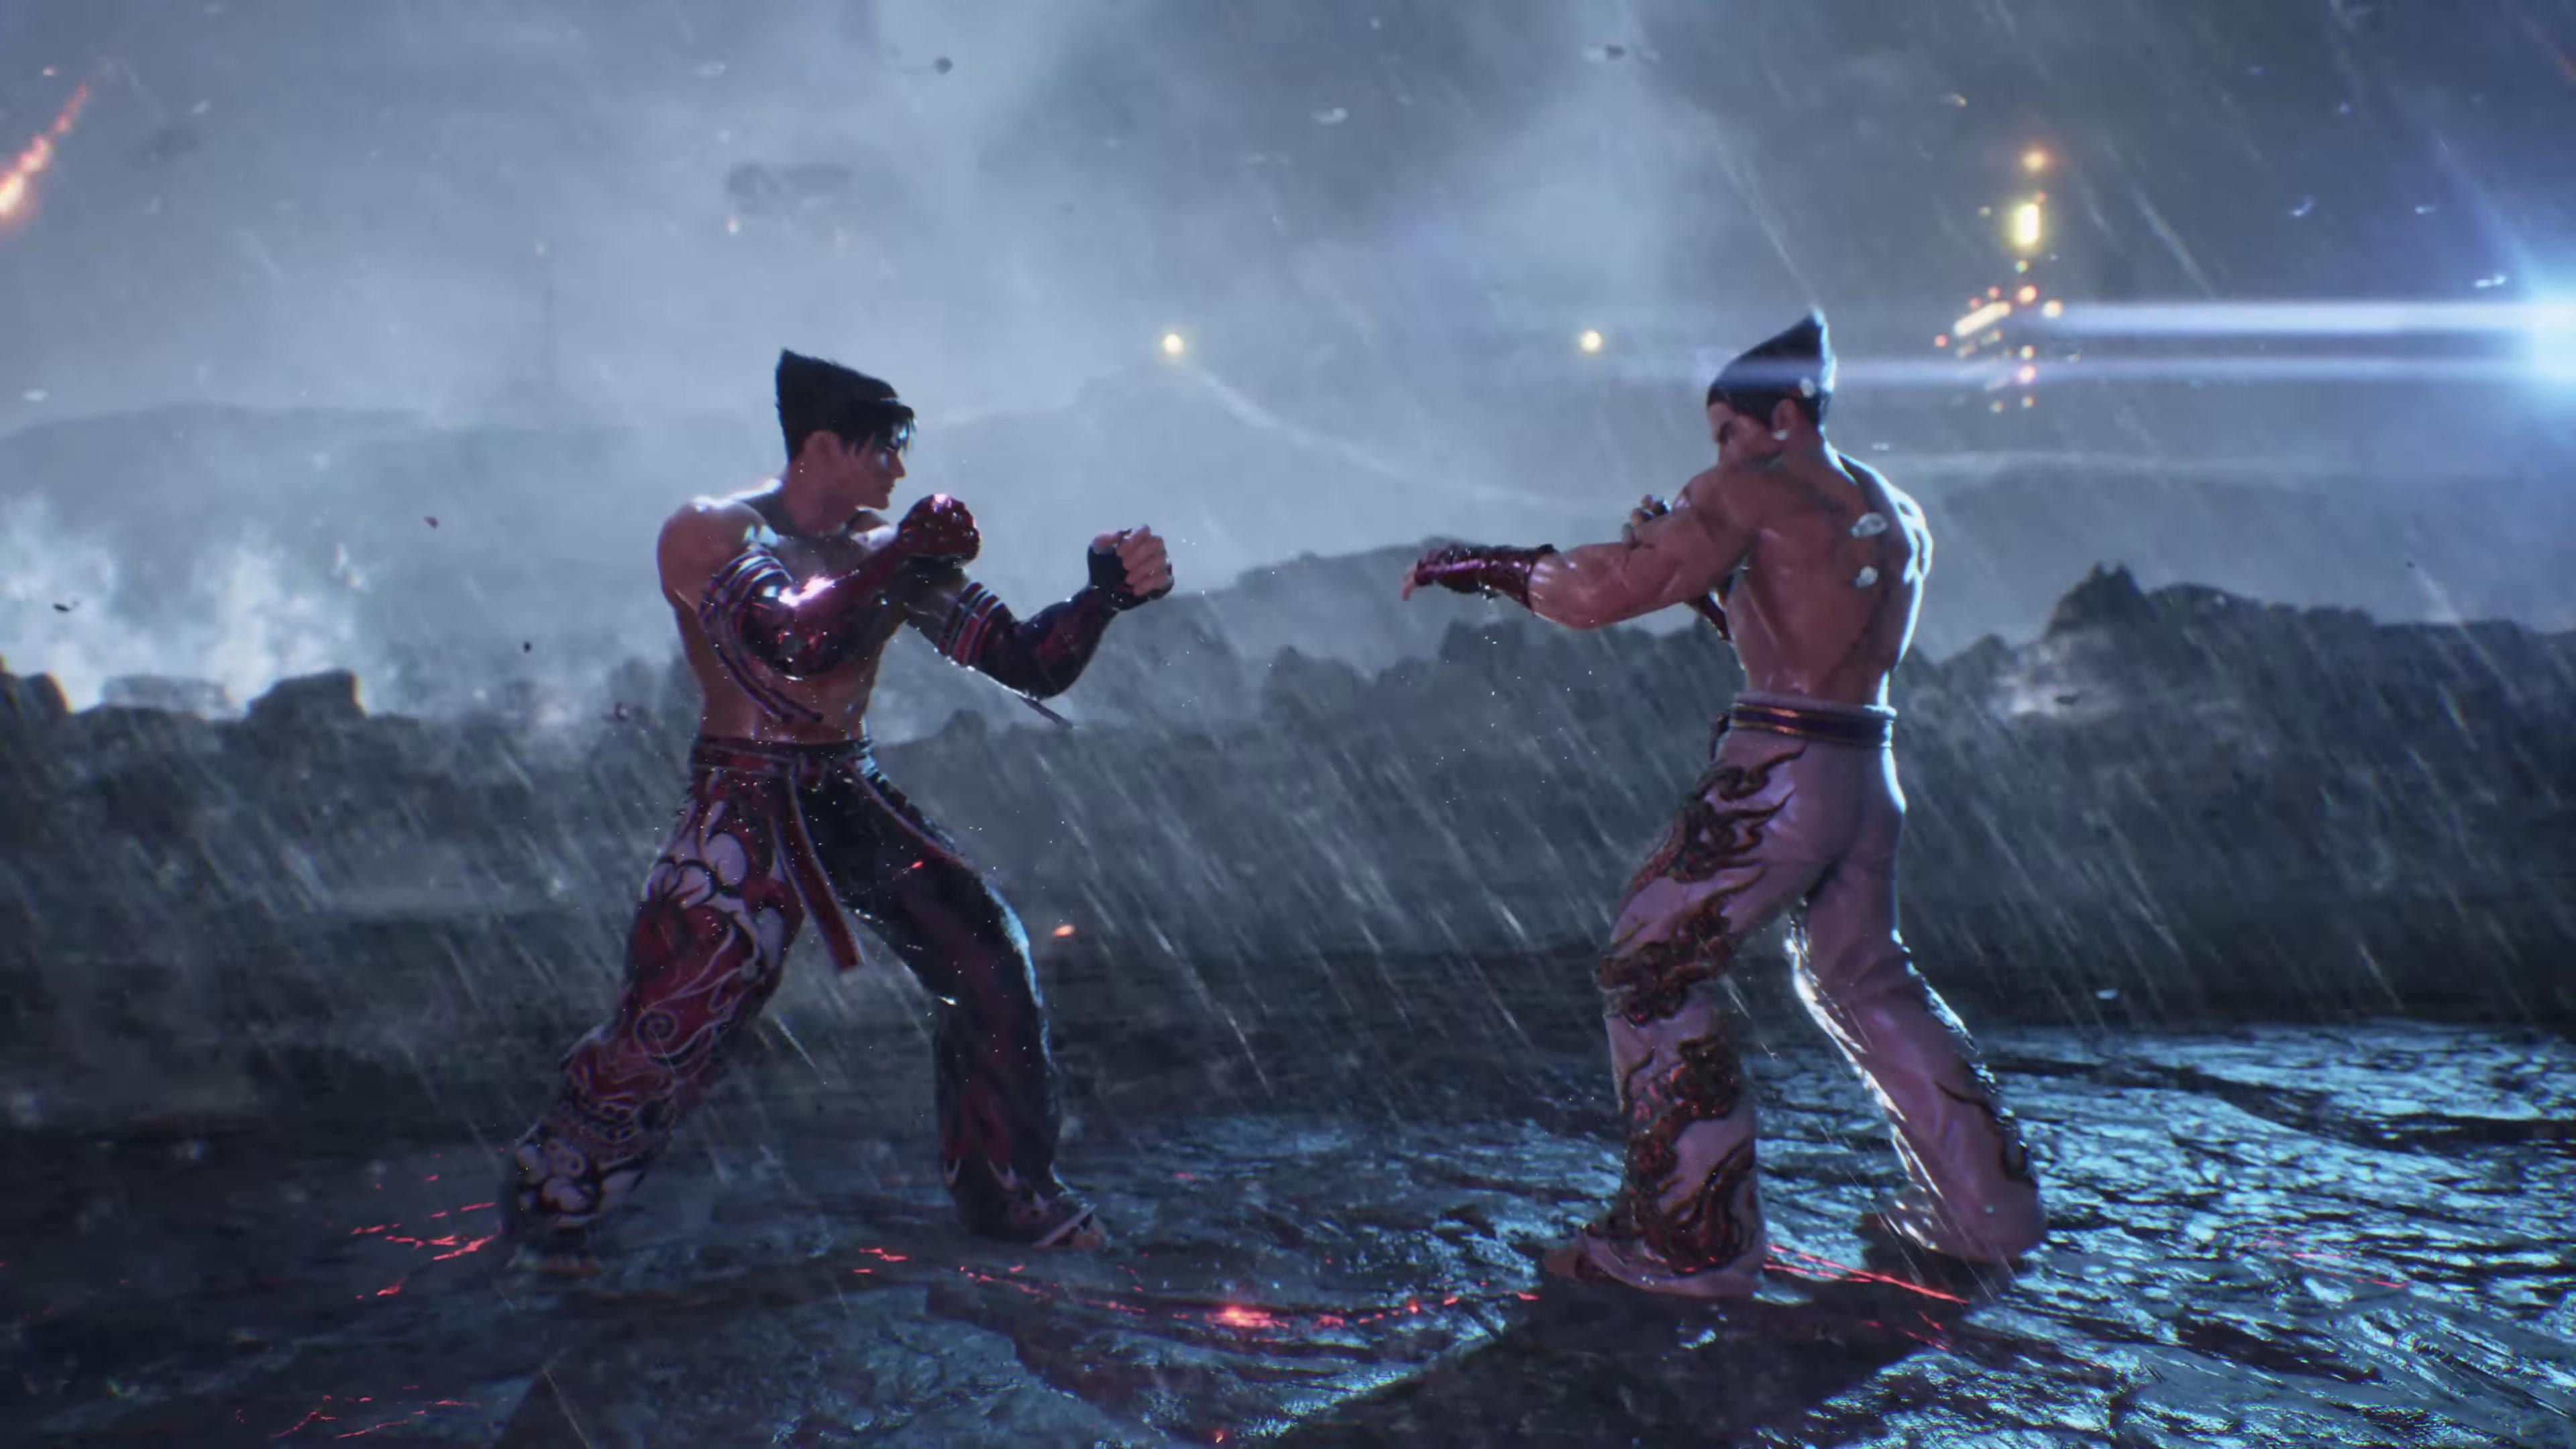 Tekken 8 developers have unveiled two more characters for the new